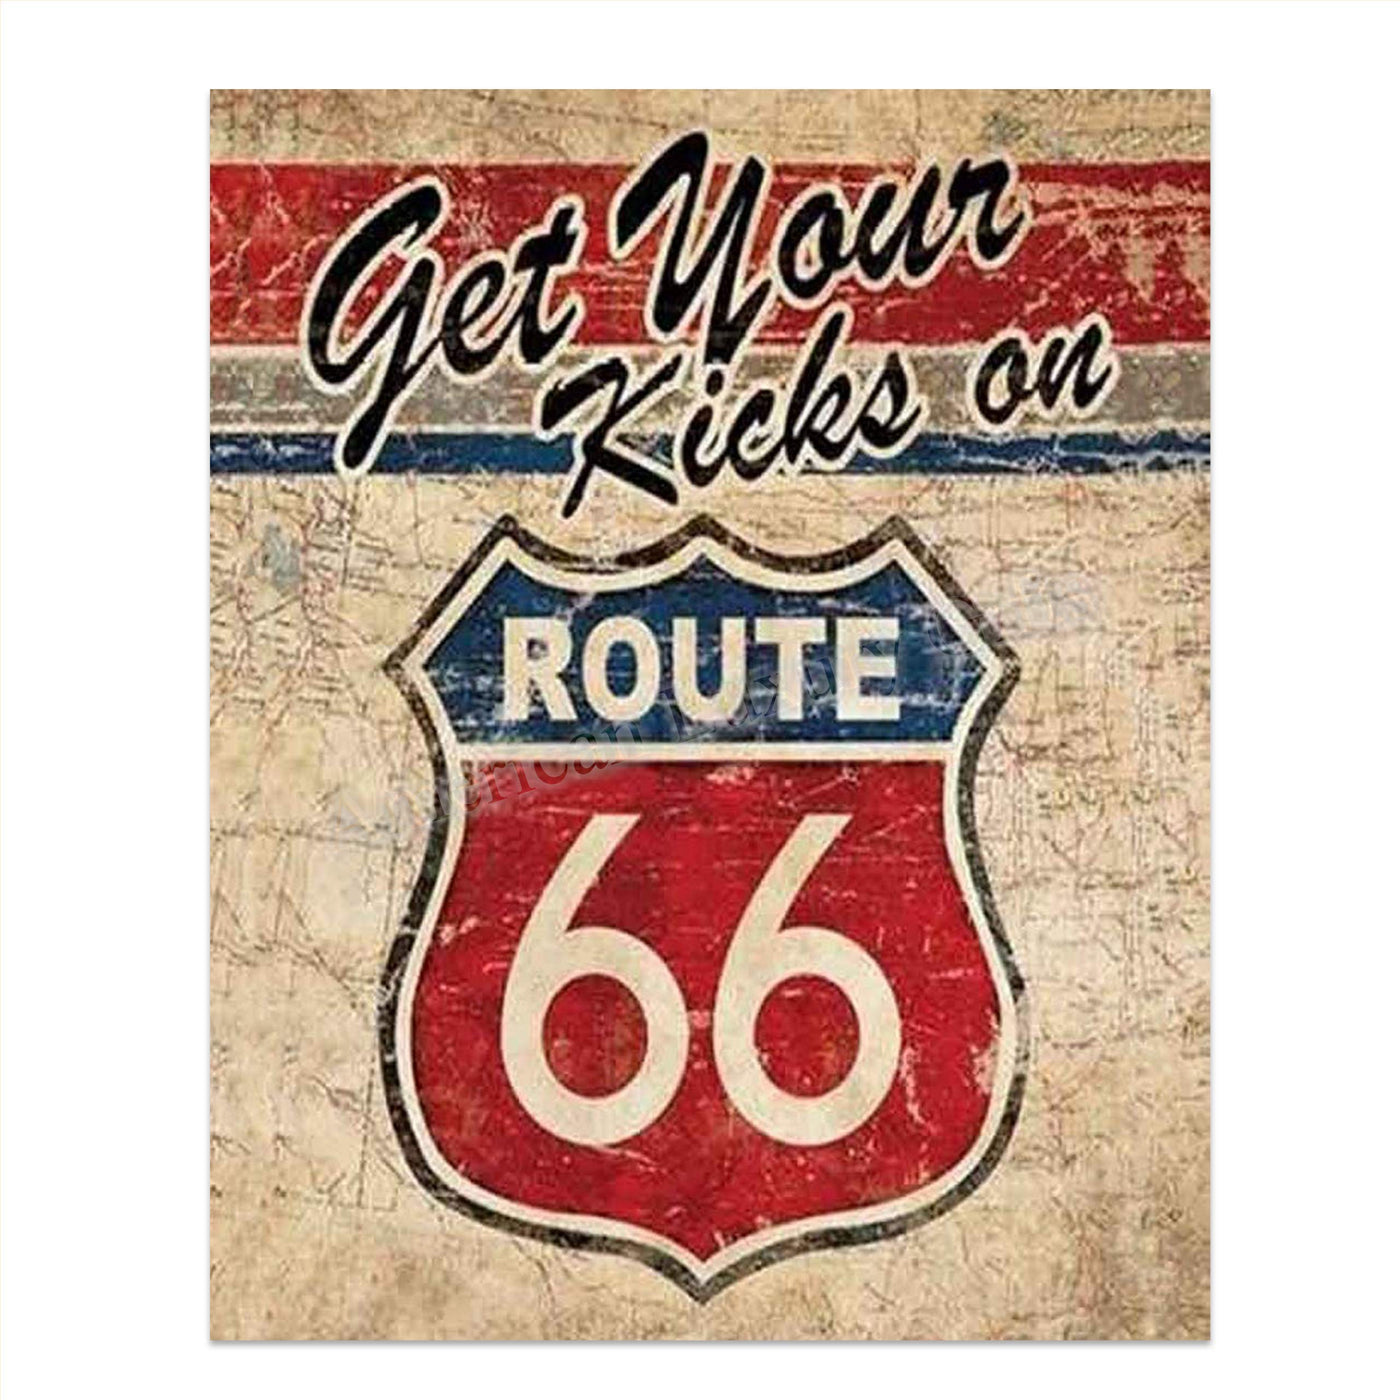 Get Your Kicks on Route 66- Vintage Sign Print- 8 x10 Wall Decor- Ready To Frame. Great Mens Gift- Home Decor- Office Decor. Great for Man Cave- Bar- Garage- Dorm's. Perfect for Car Lovers!